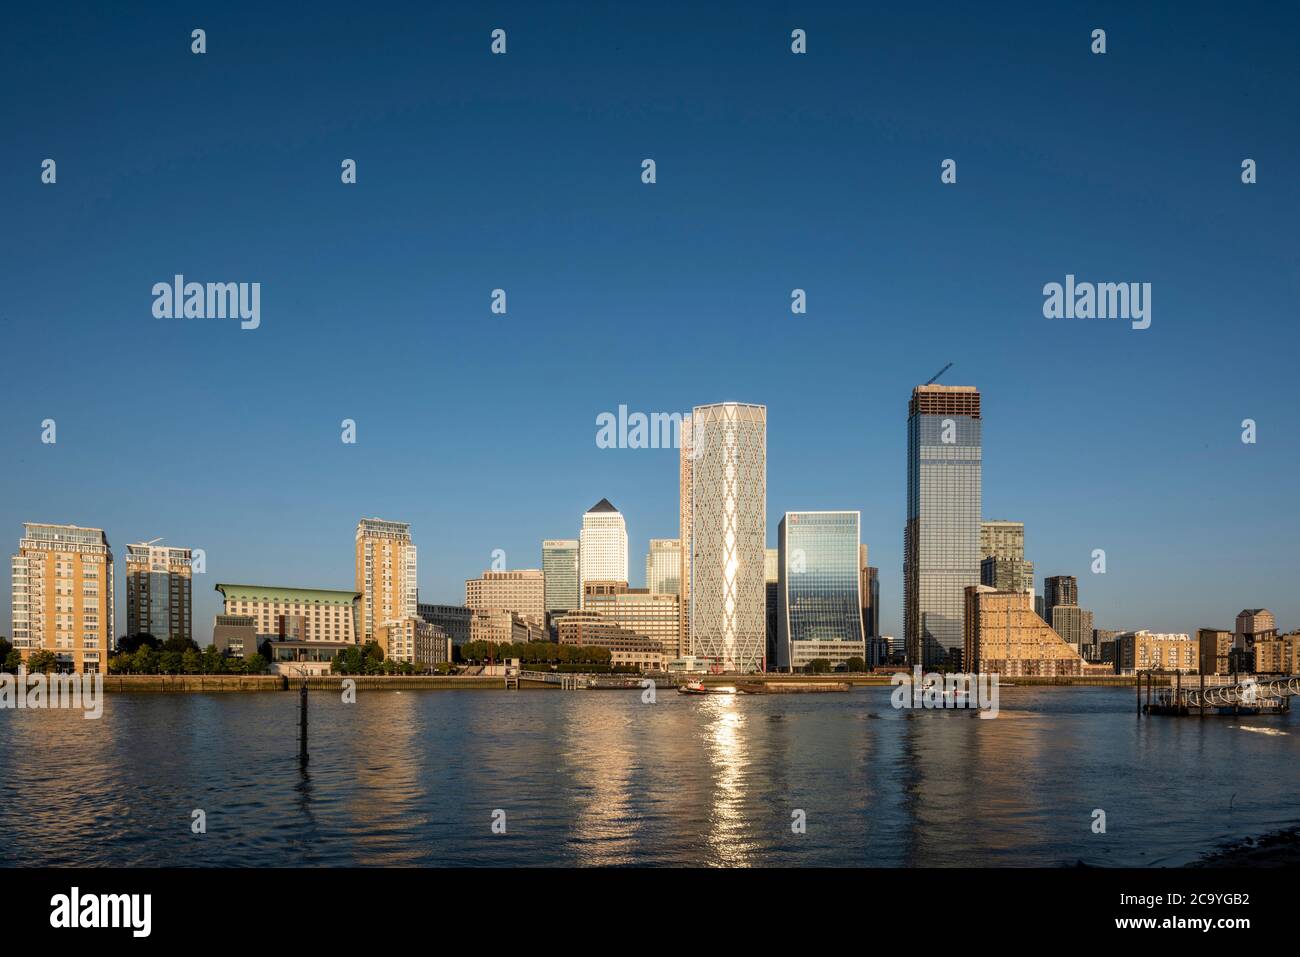 View across Thames from west with reflection in water. Isle of Dogs, London, United Kingdom. Architect: Various, 2020. Stock Photo